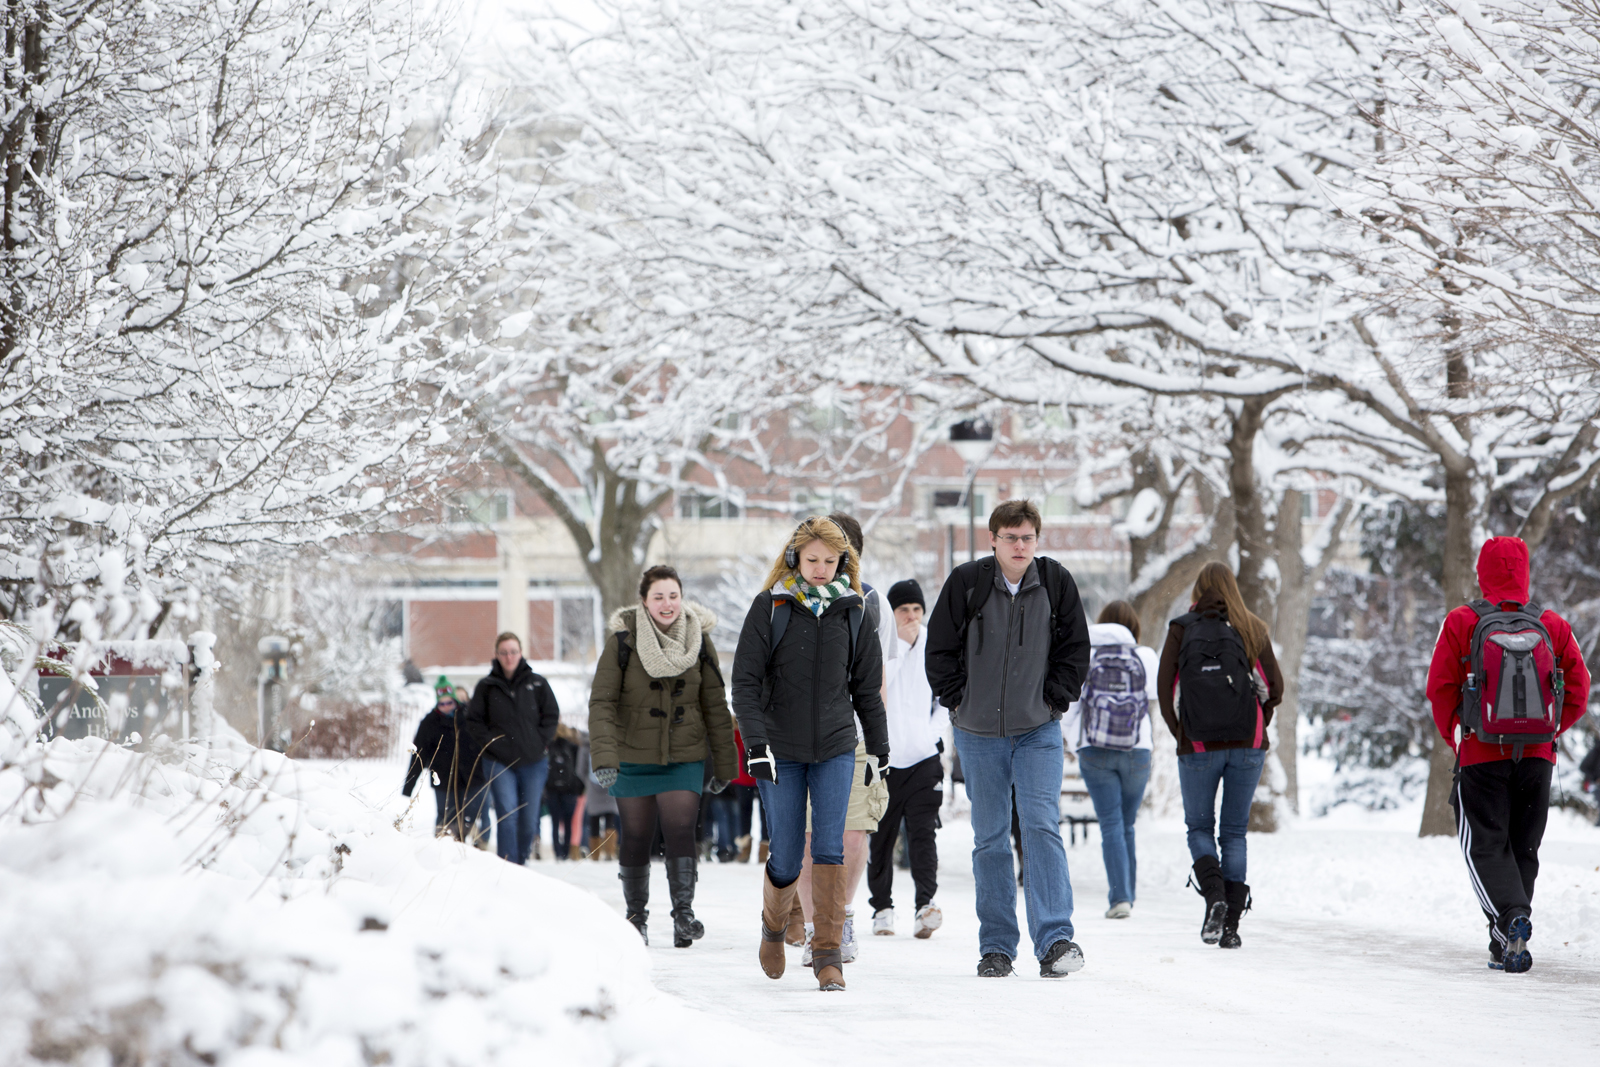 Students on campus in the winter.